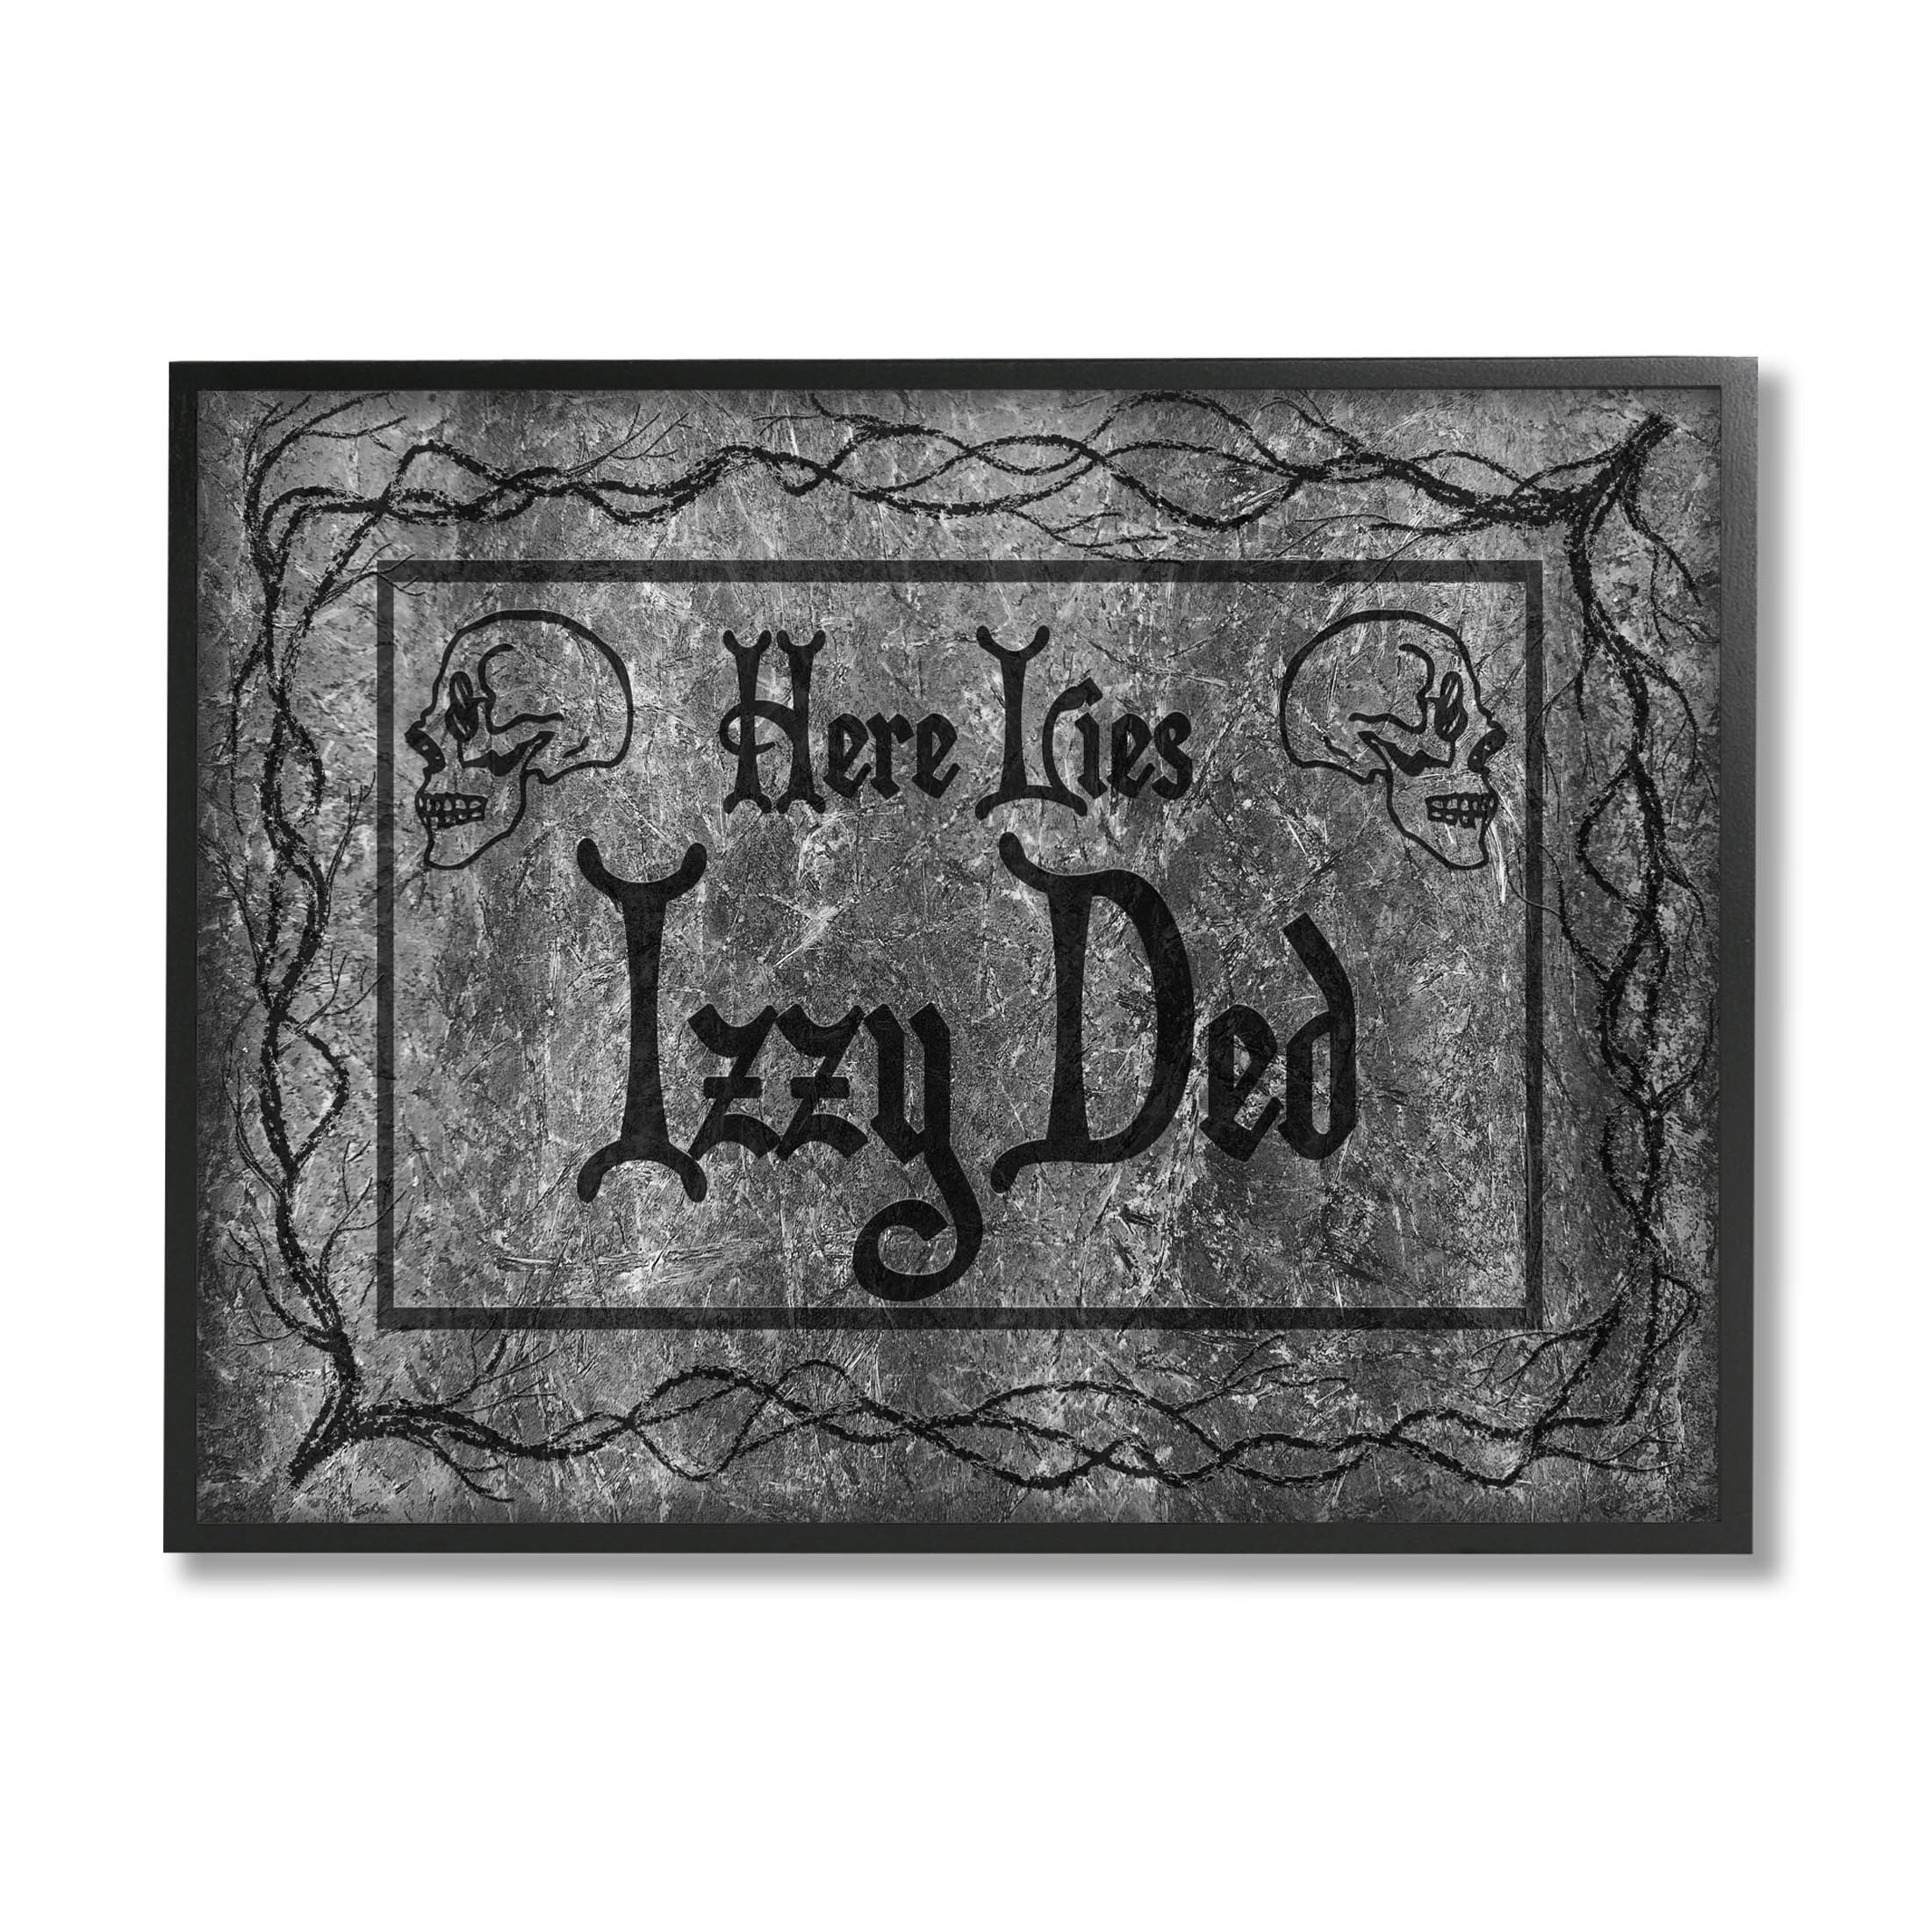 Stupell Industries Here Lies Izzy Ded Gravestone Graphic Art Black Framed Art Print Wall Art, Design by Lil' Rue - image 1 of 7